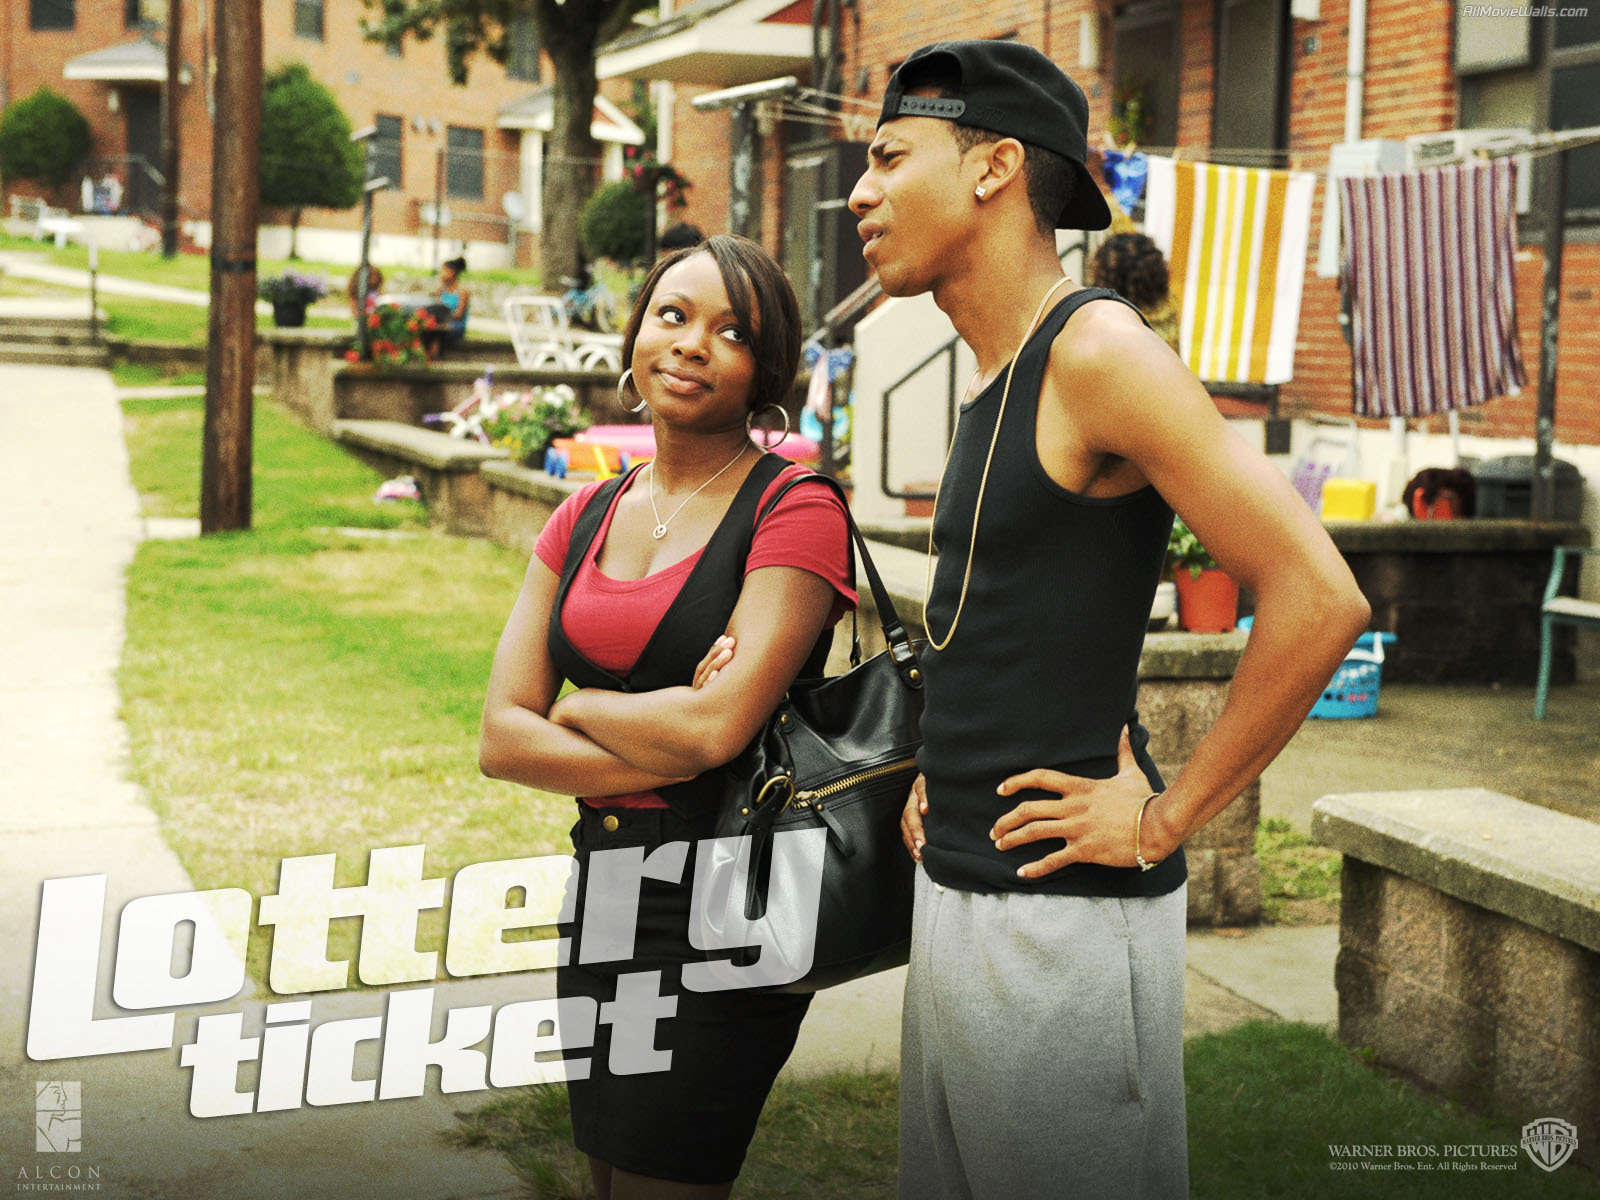 Movies Wallpaper: The Lottery Ticket.